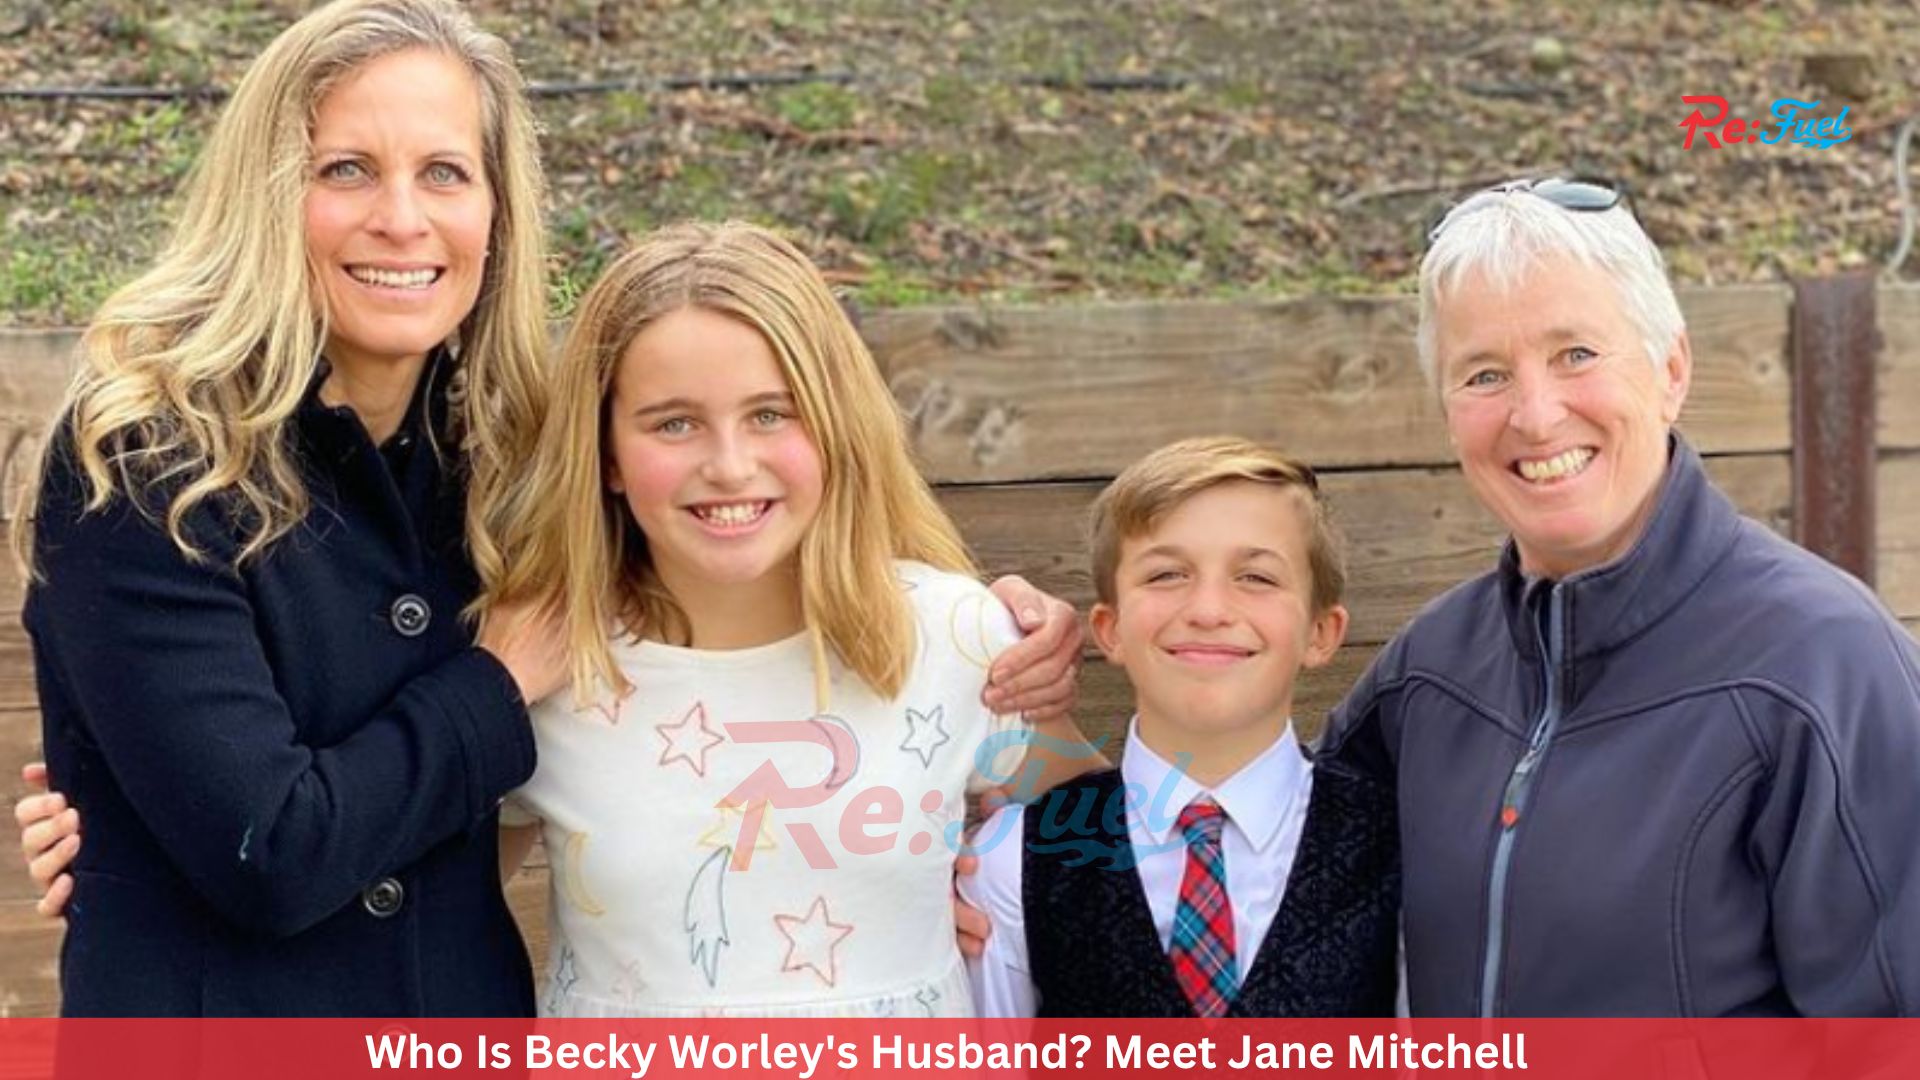 Who Is Becky Worley's Husband? Meet Jane Mitchell